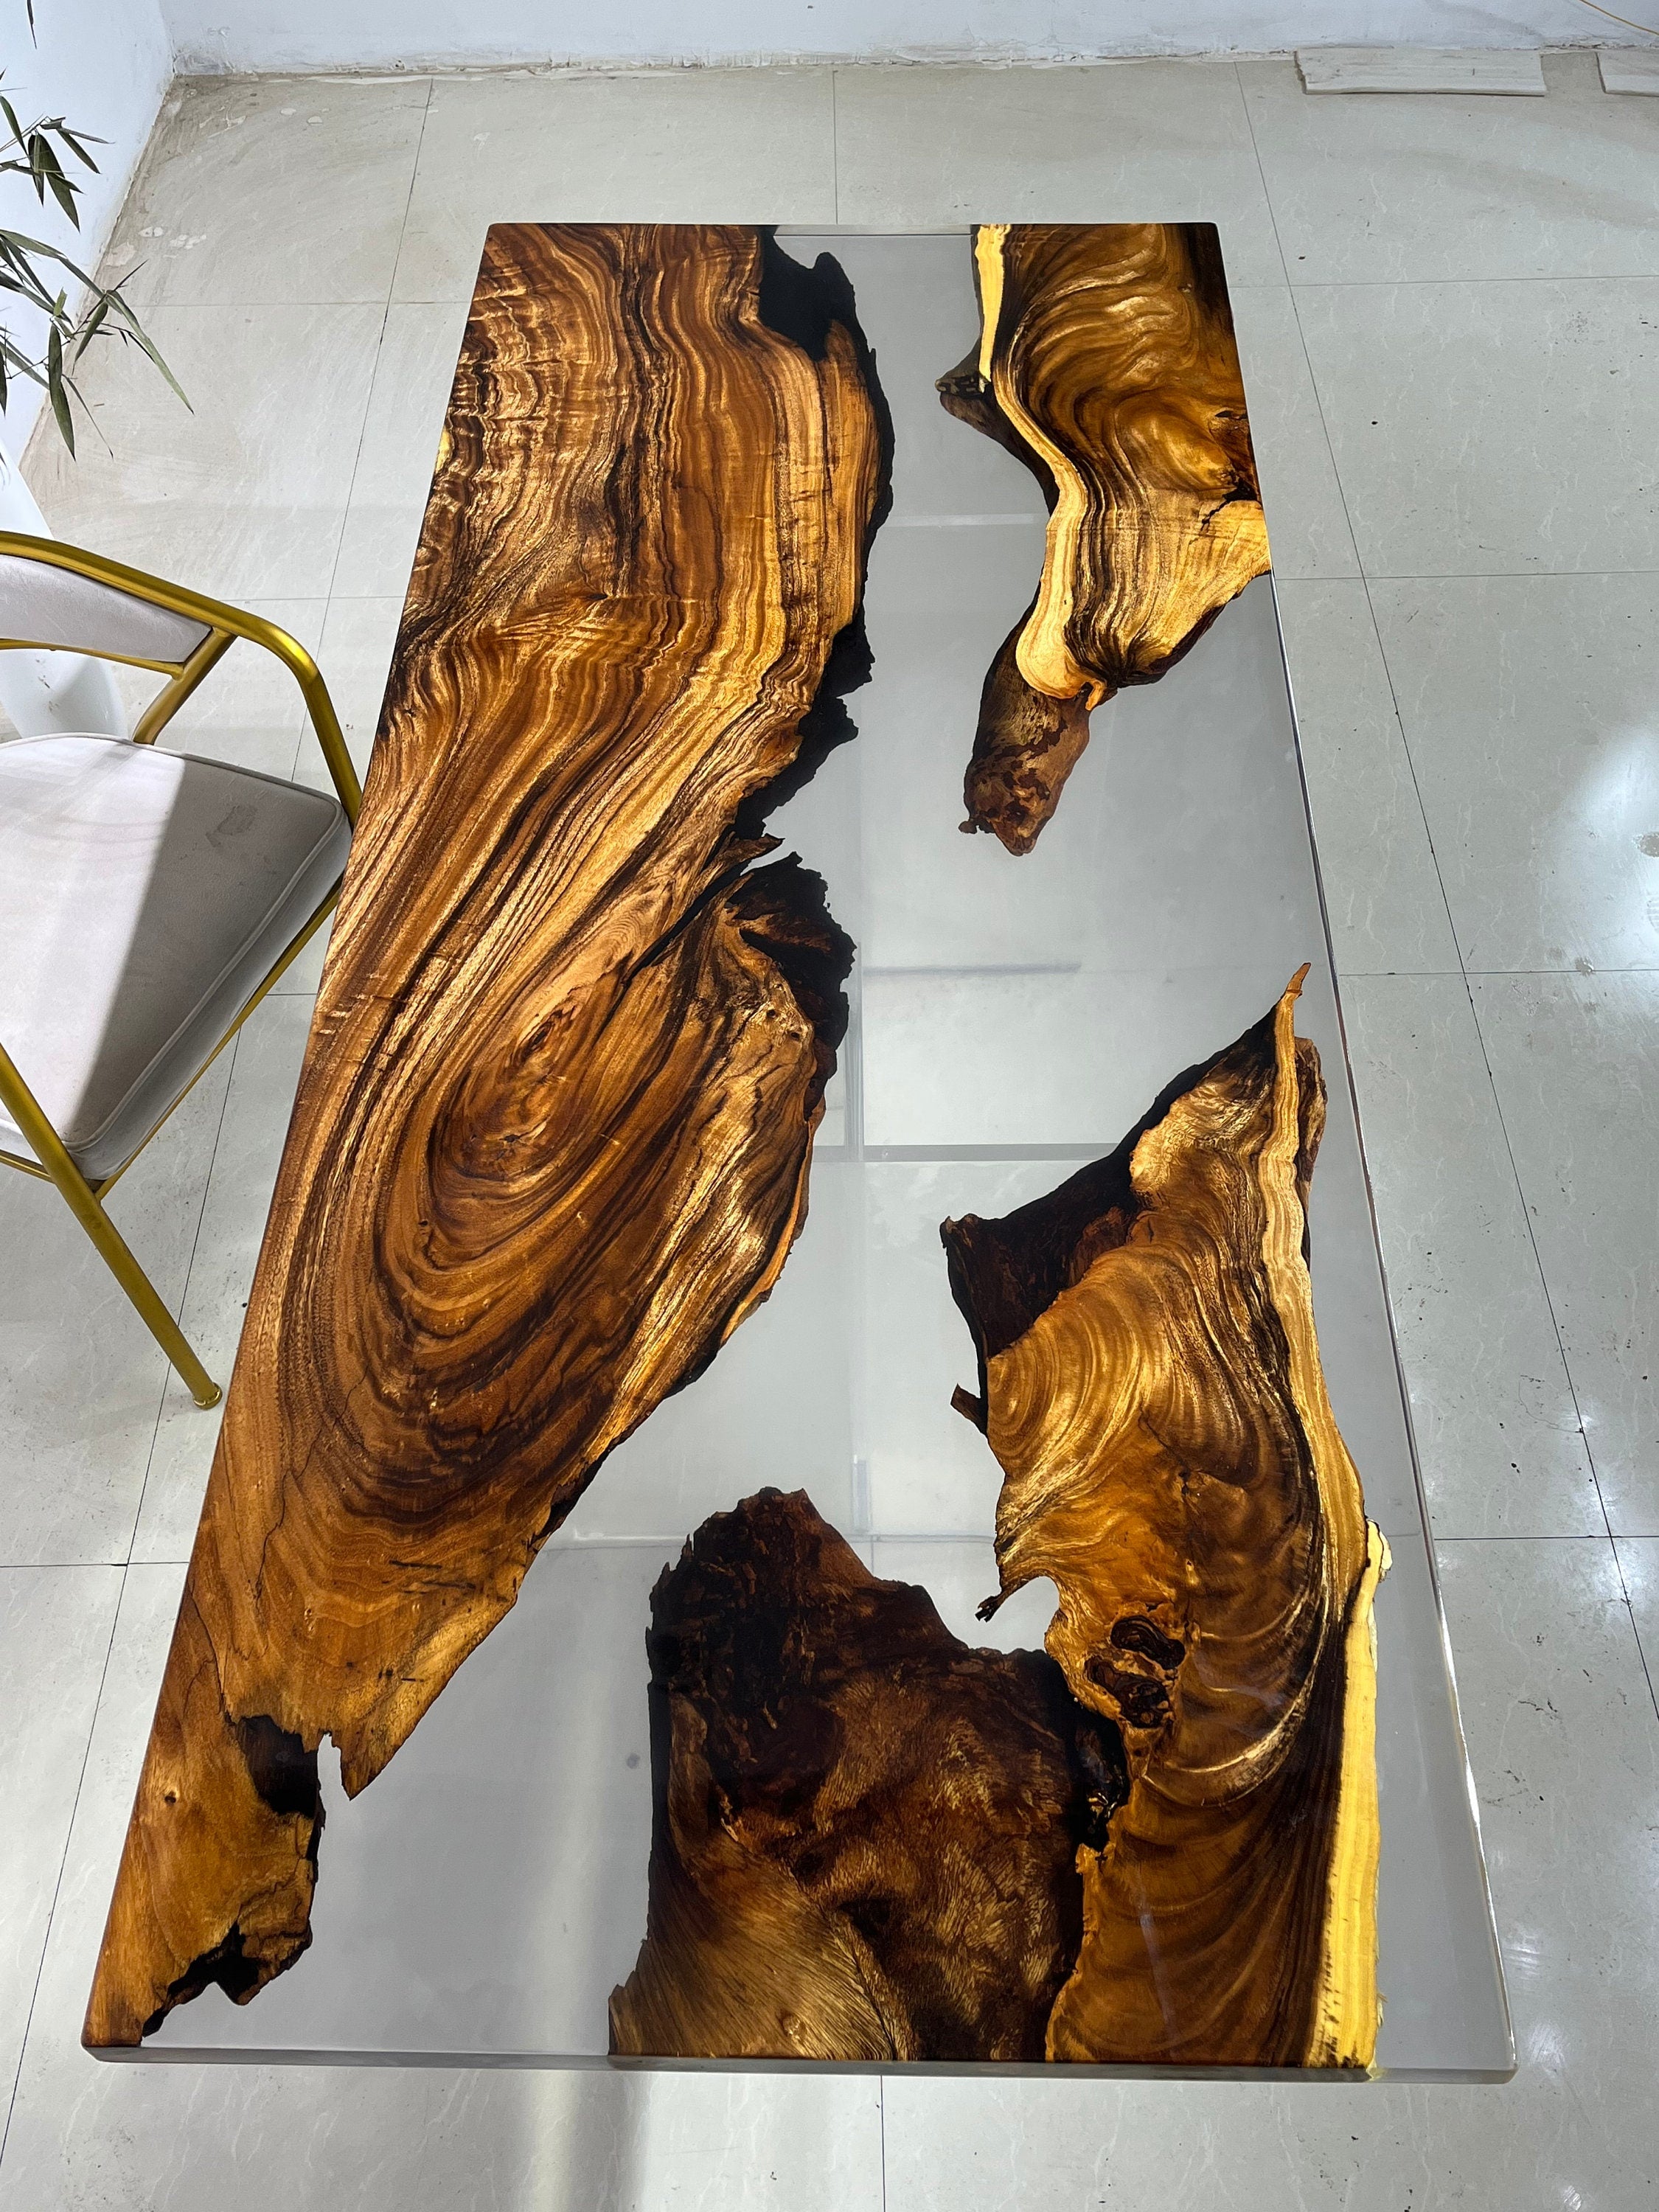 Transparent Epoxy Dining Table - Walnut Resin Table - Special Order Walnut Epoxy Table